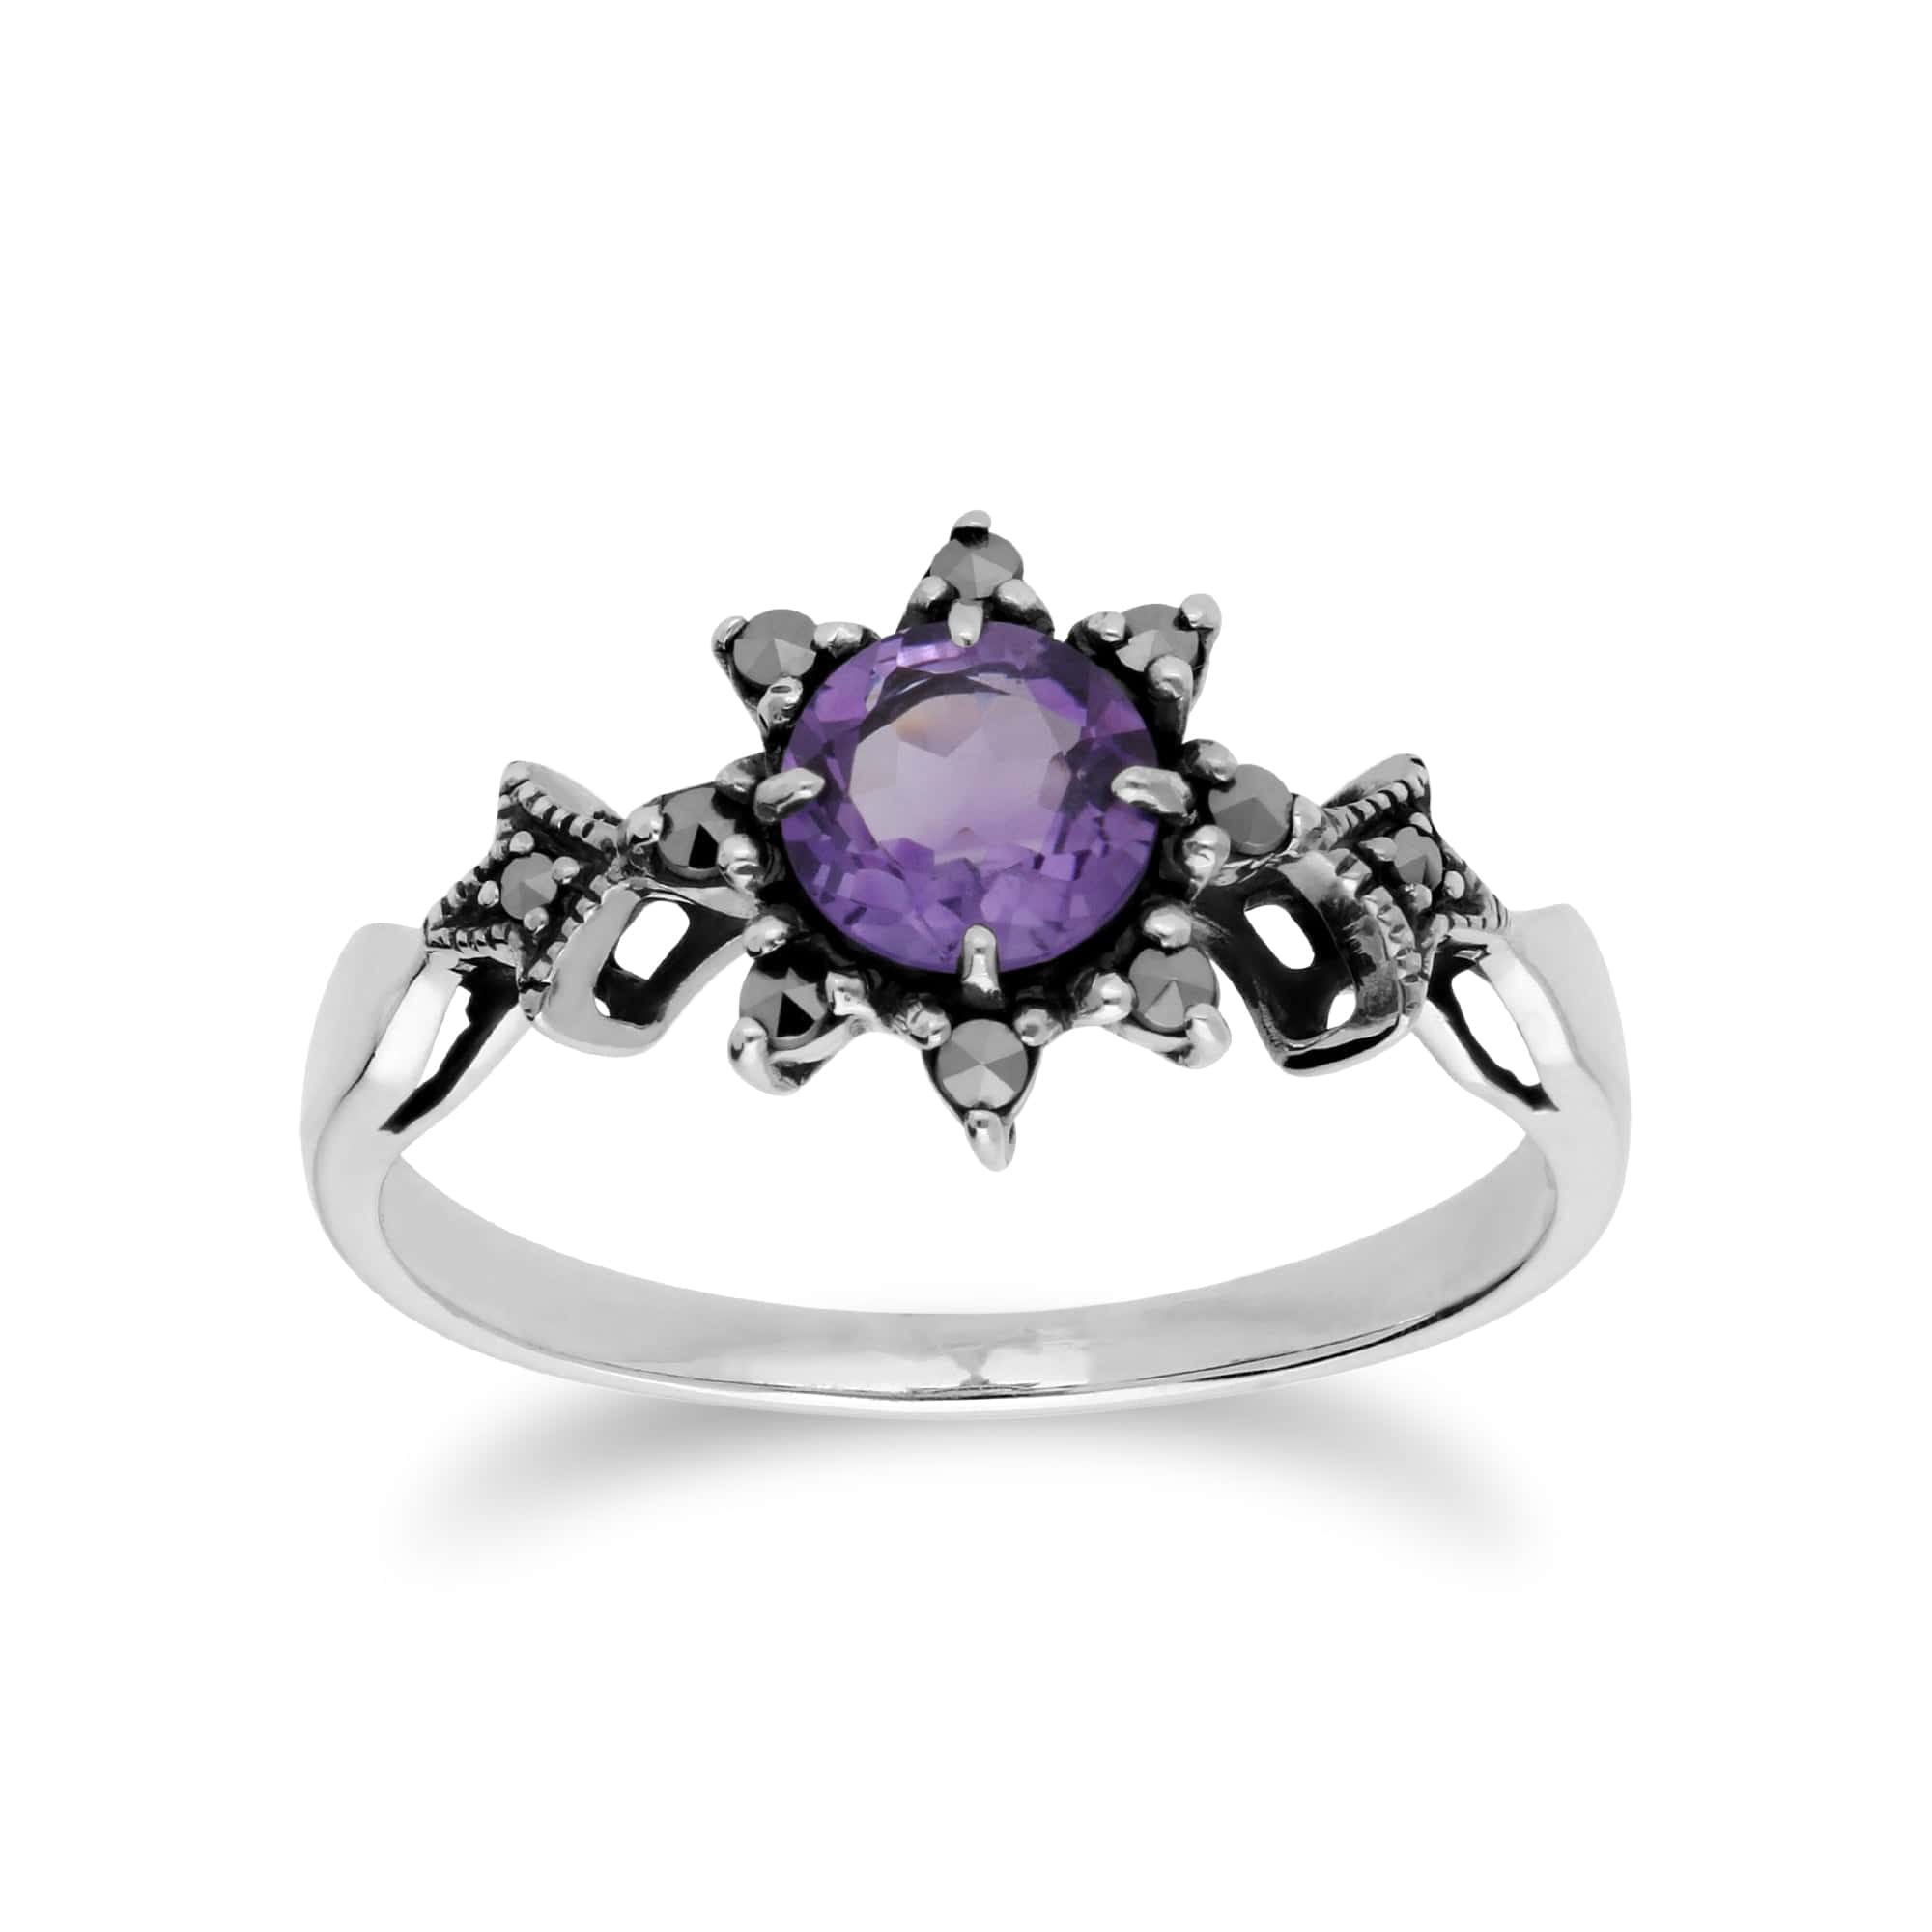 214N696002925-214R599502925 Art Nouveau Style Style Round Amethyst & Marcasite Starburst Pendant & Ring Set in 925 Sterling Silver 3